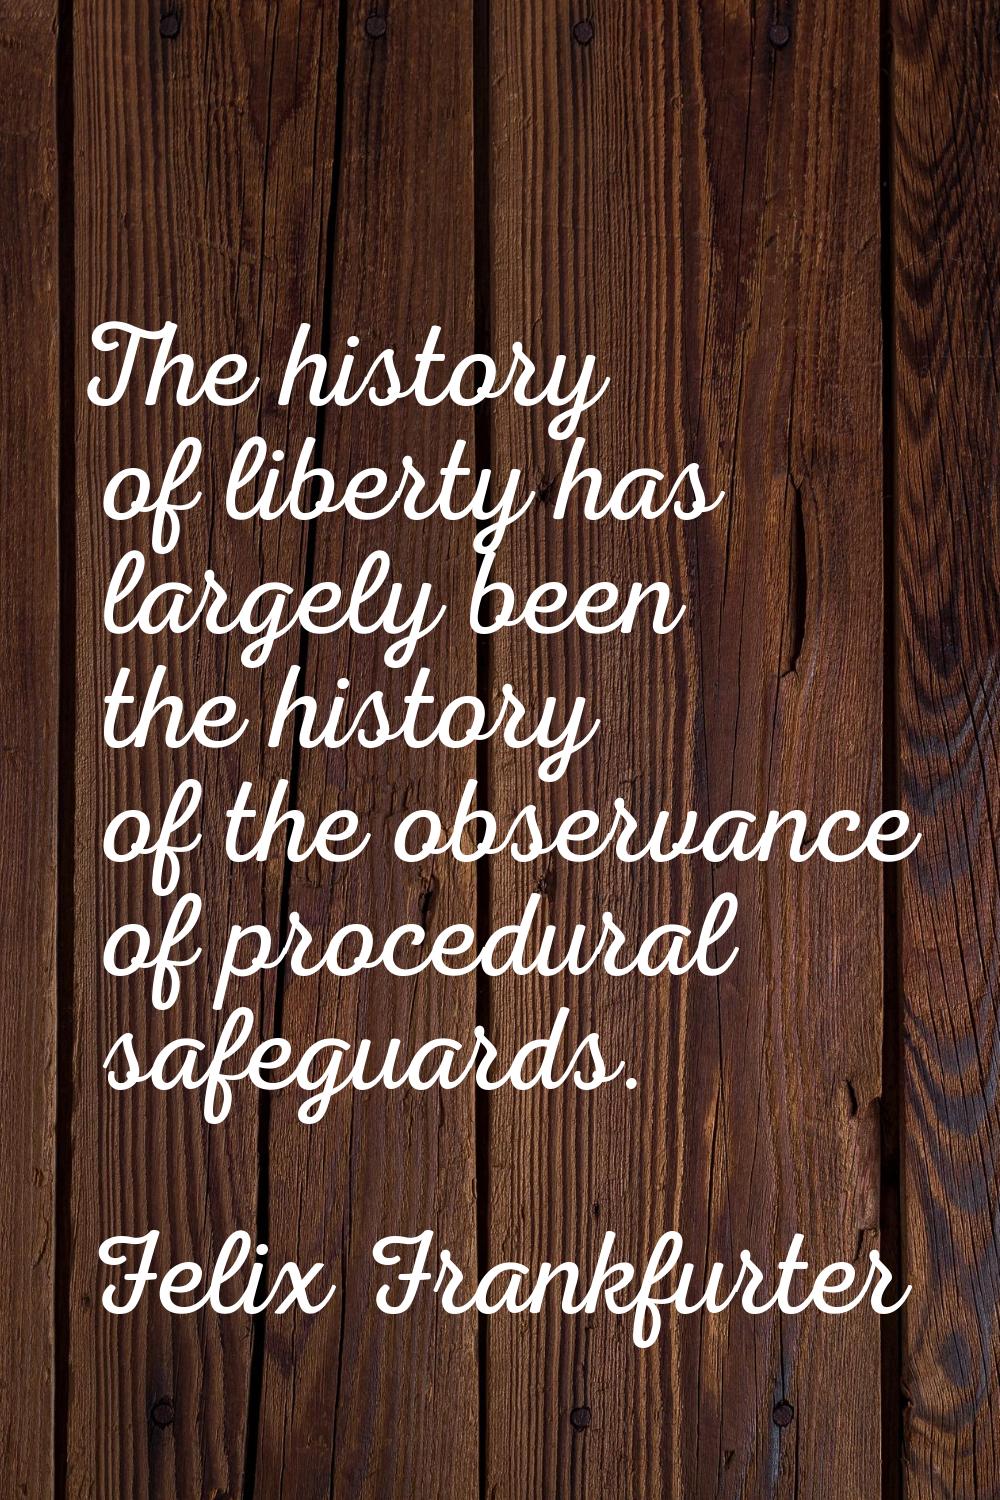 The history of liberty has largely been the history of the observance of procedural safeguards.